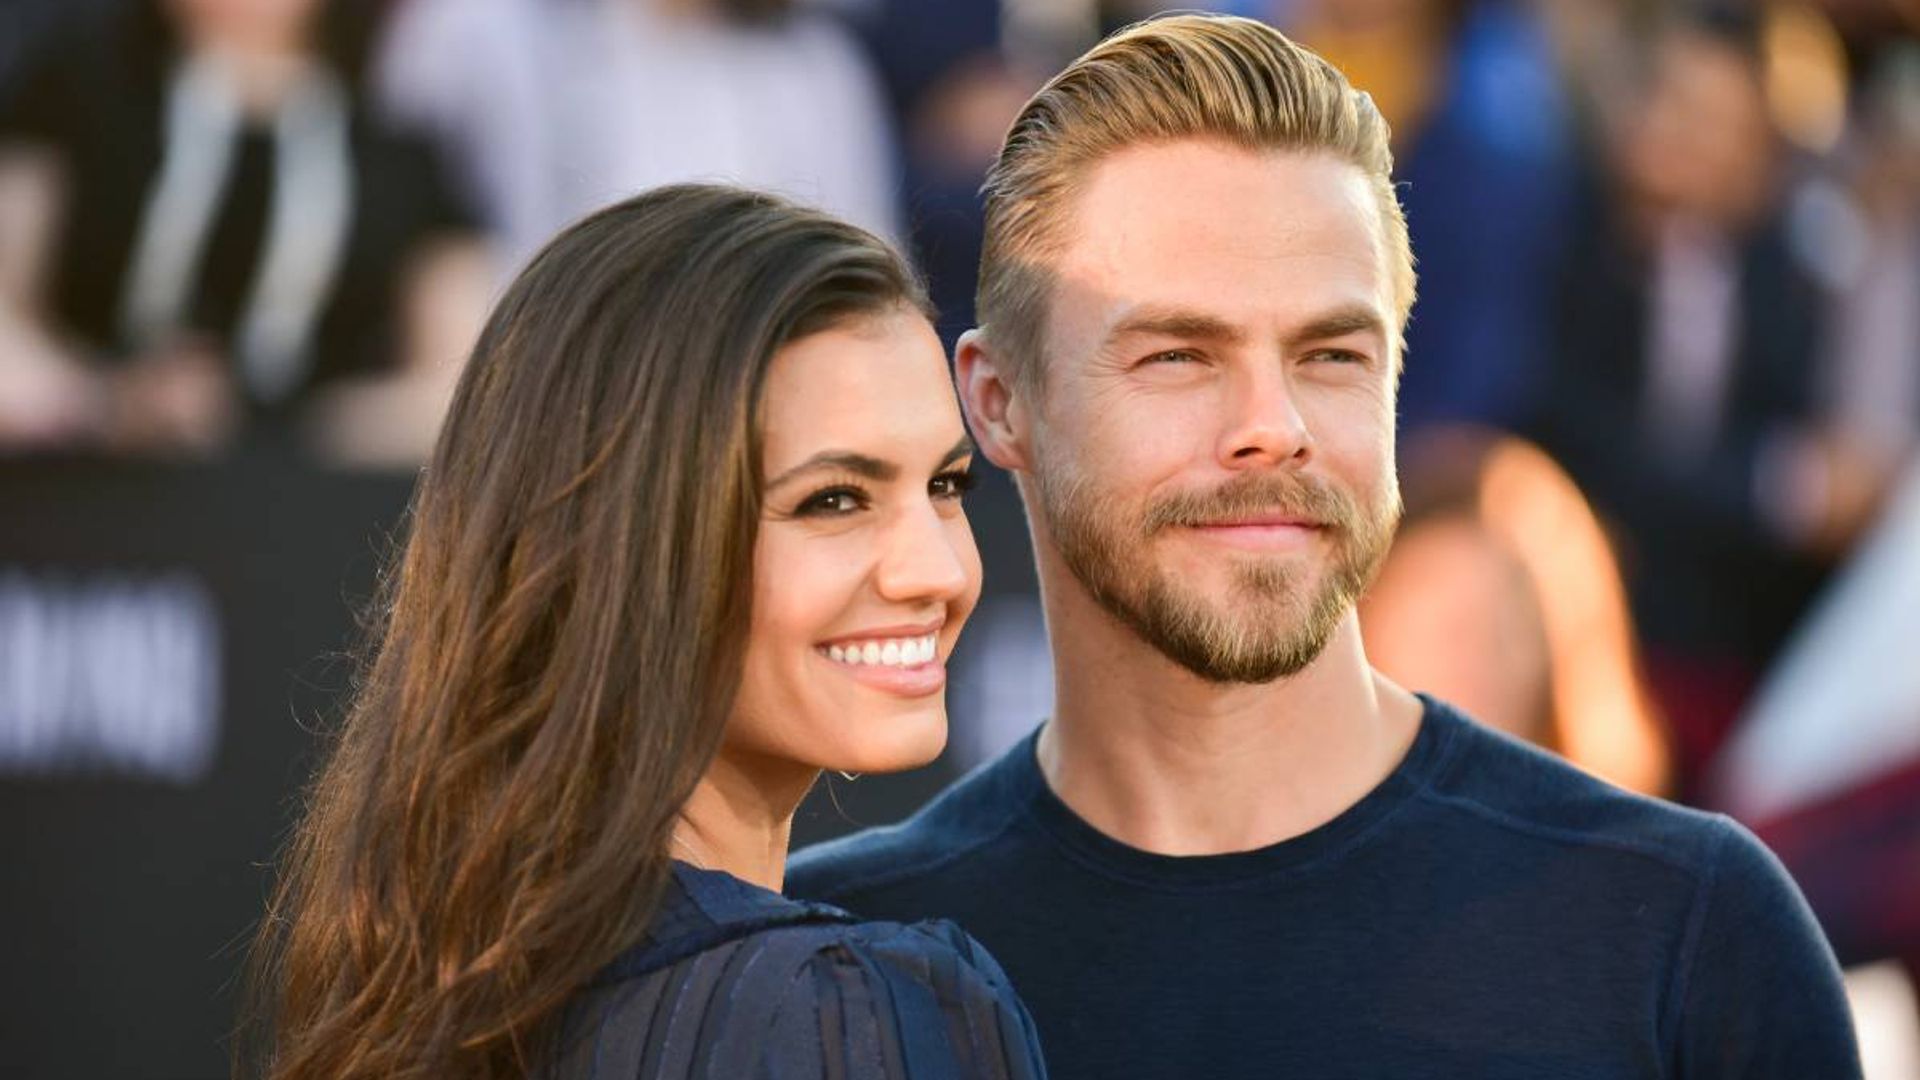 Exclusive: DWTS' Derek Hough talks upcoming milestone with girlfriend Hayley Erbert and their shared passion